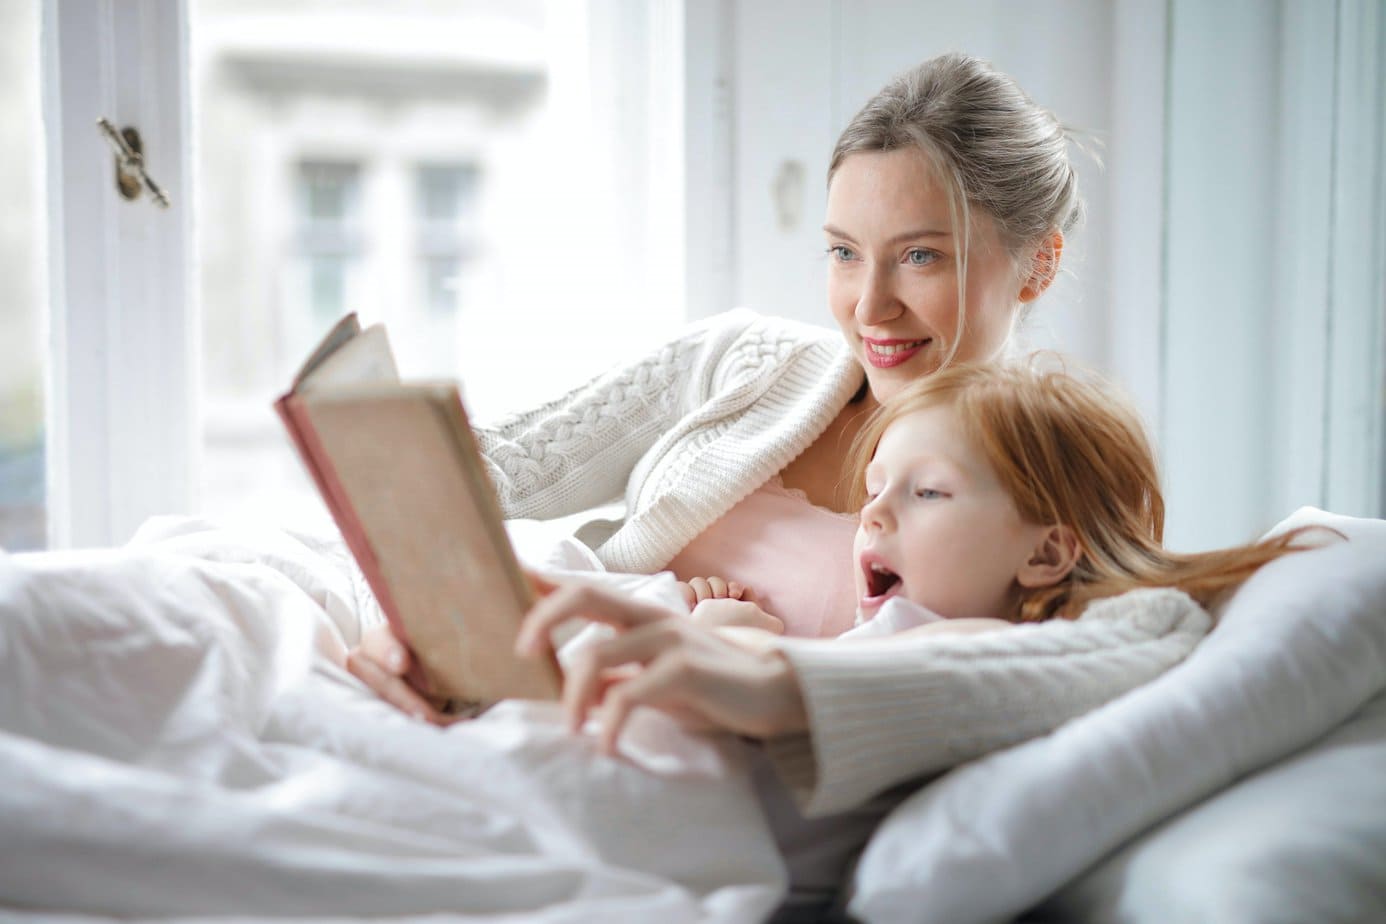 Advantages of reading together with your child